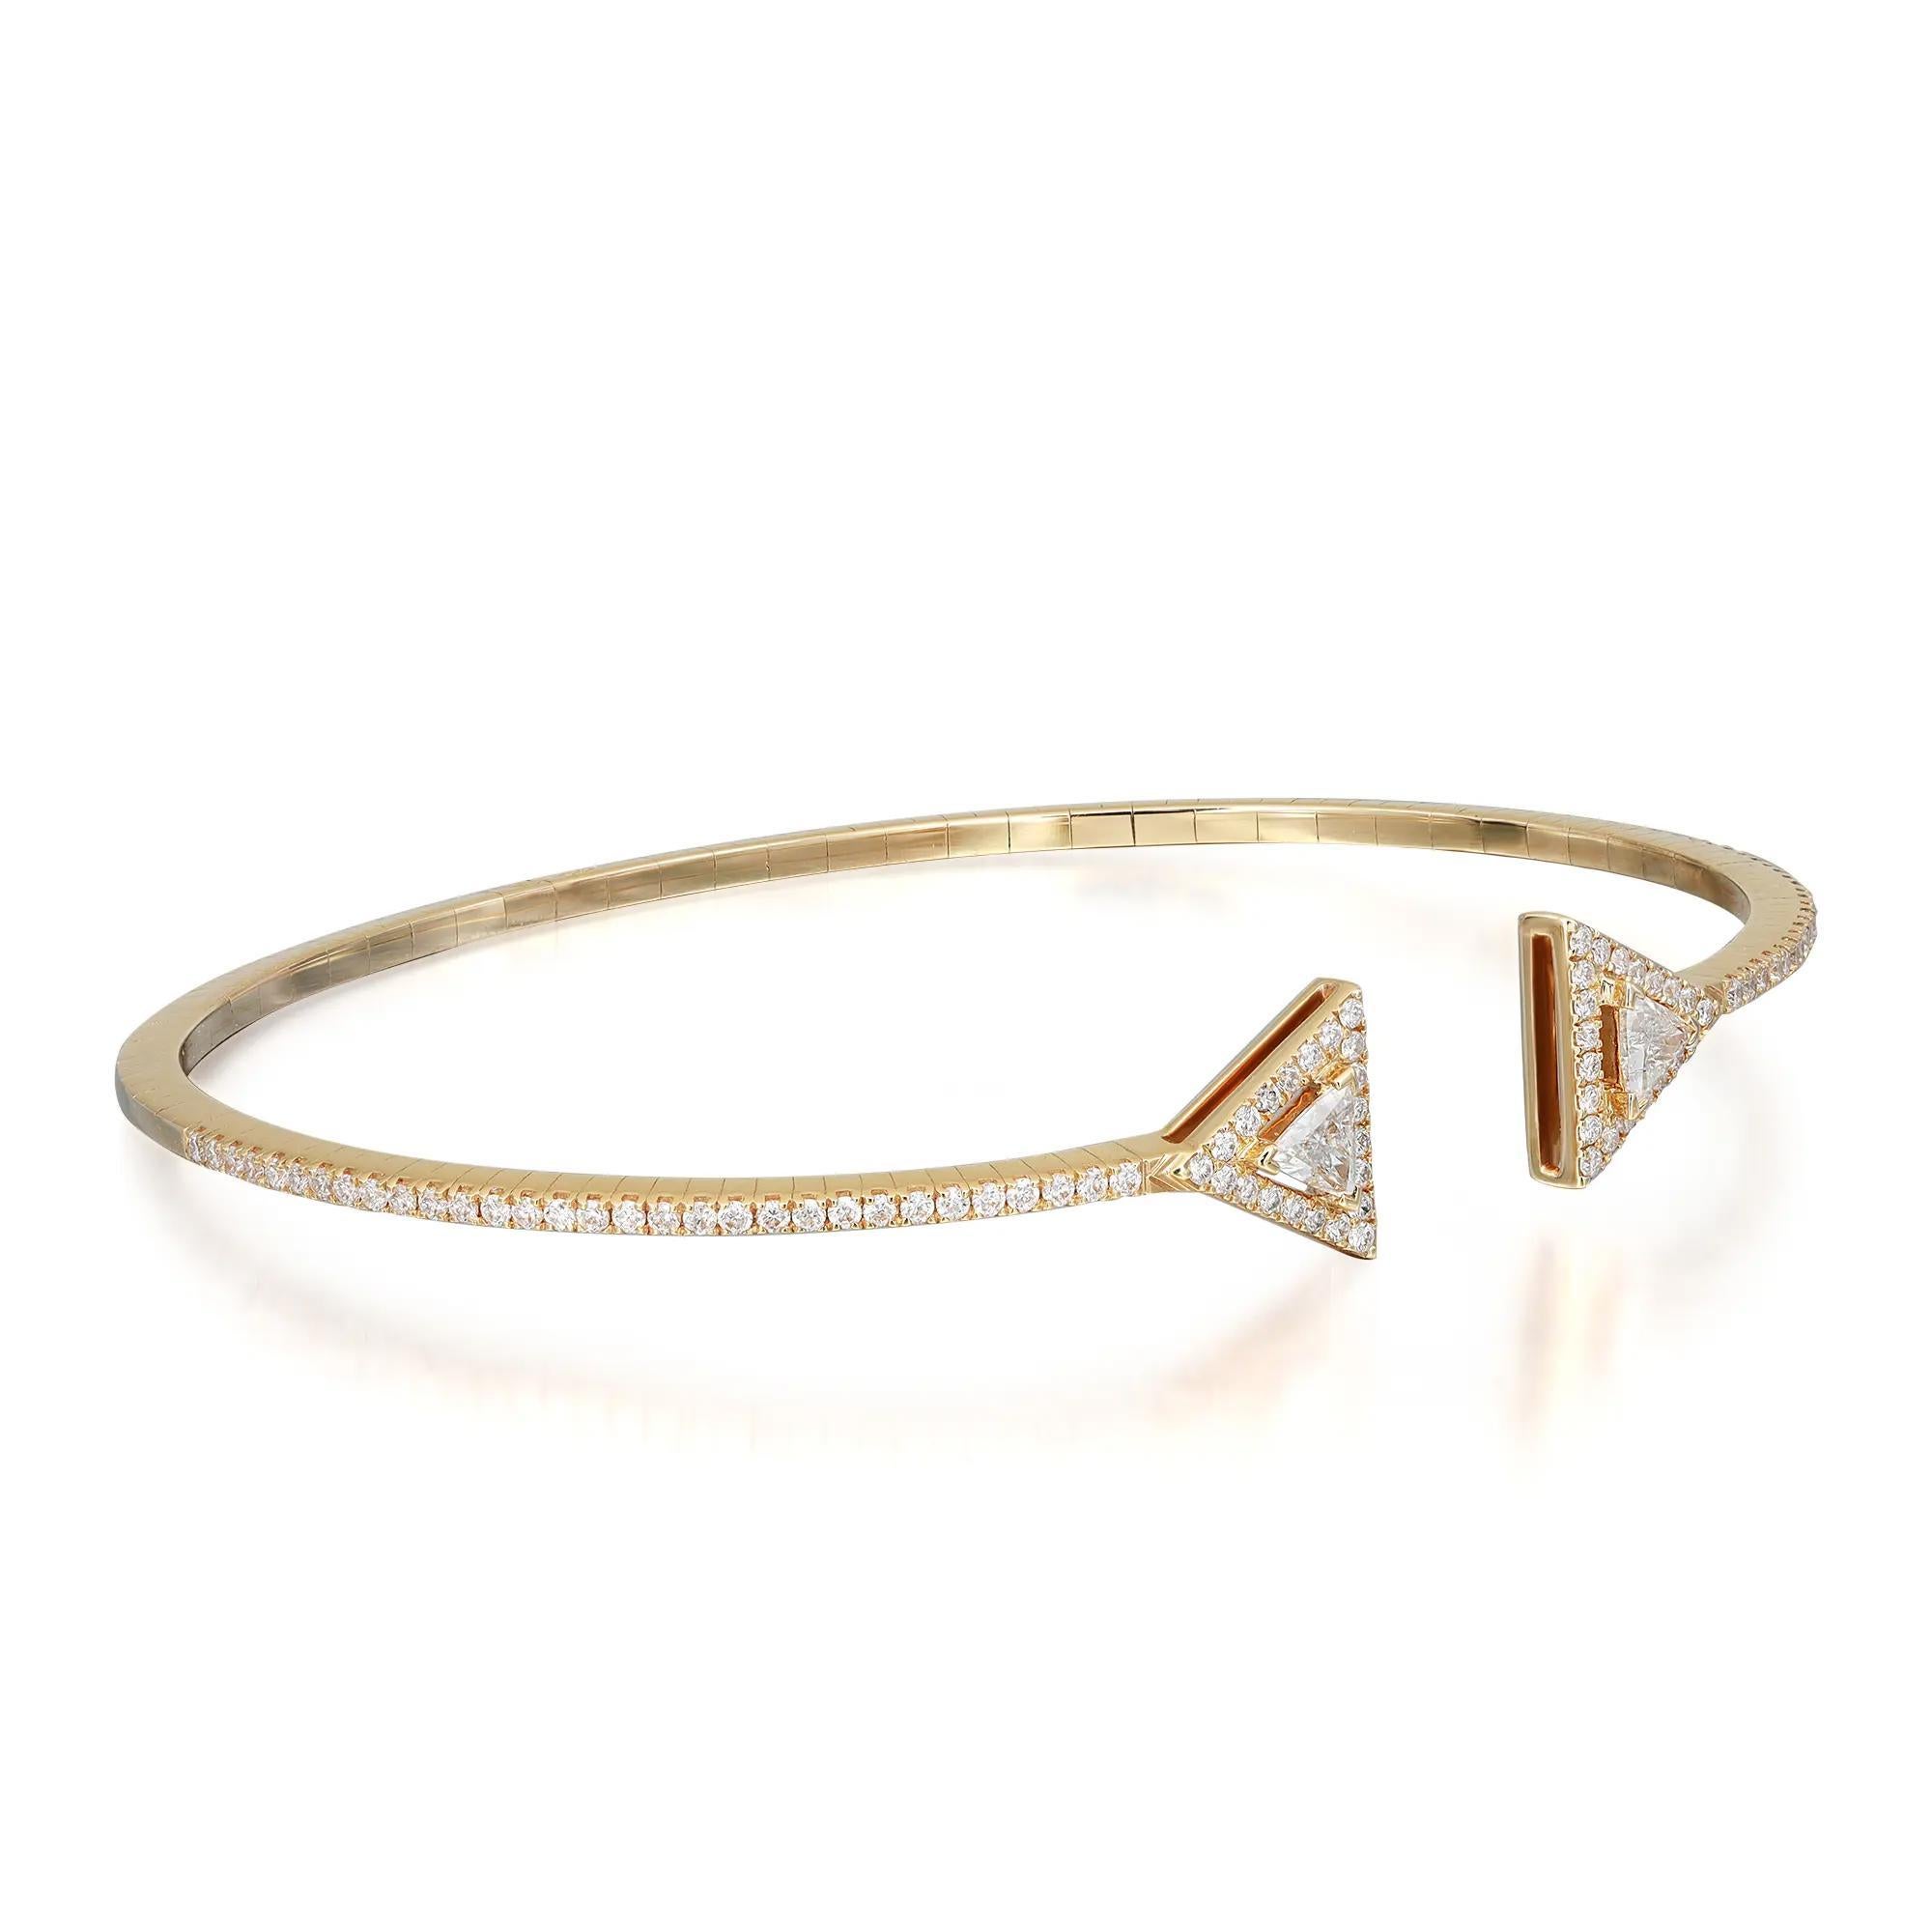 This exquisite Messika Thea Skinny diamond cuff bracelet features 2 prong set triangular cut diamonds with a halo of round brilliant cut diamonds accented halfway through the bracelet. Crafted in 18K yellow gold. Feminine and super stackable modern